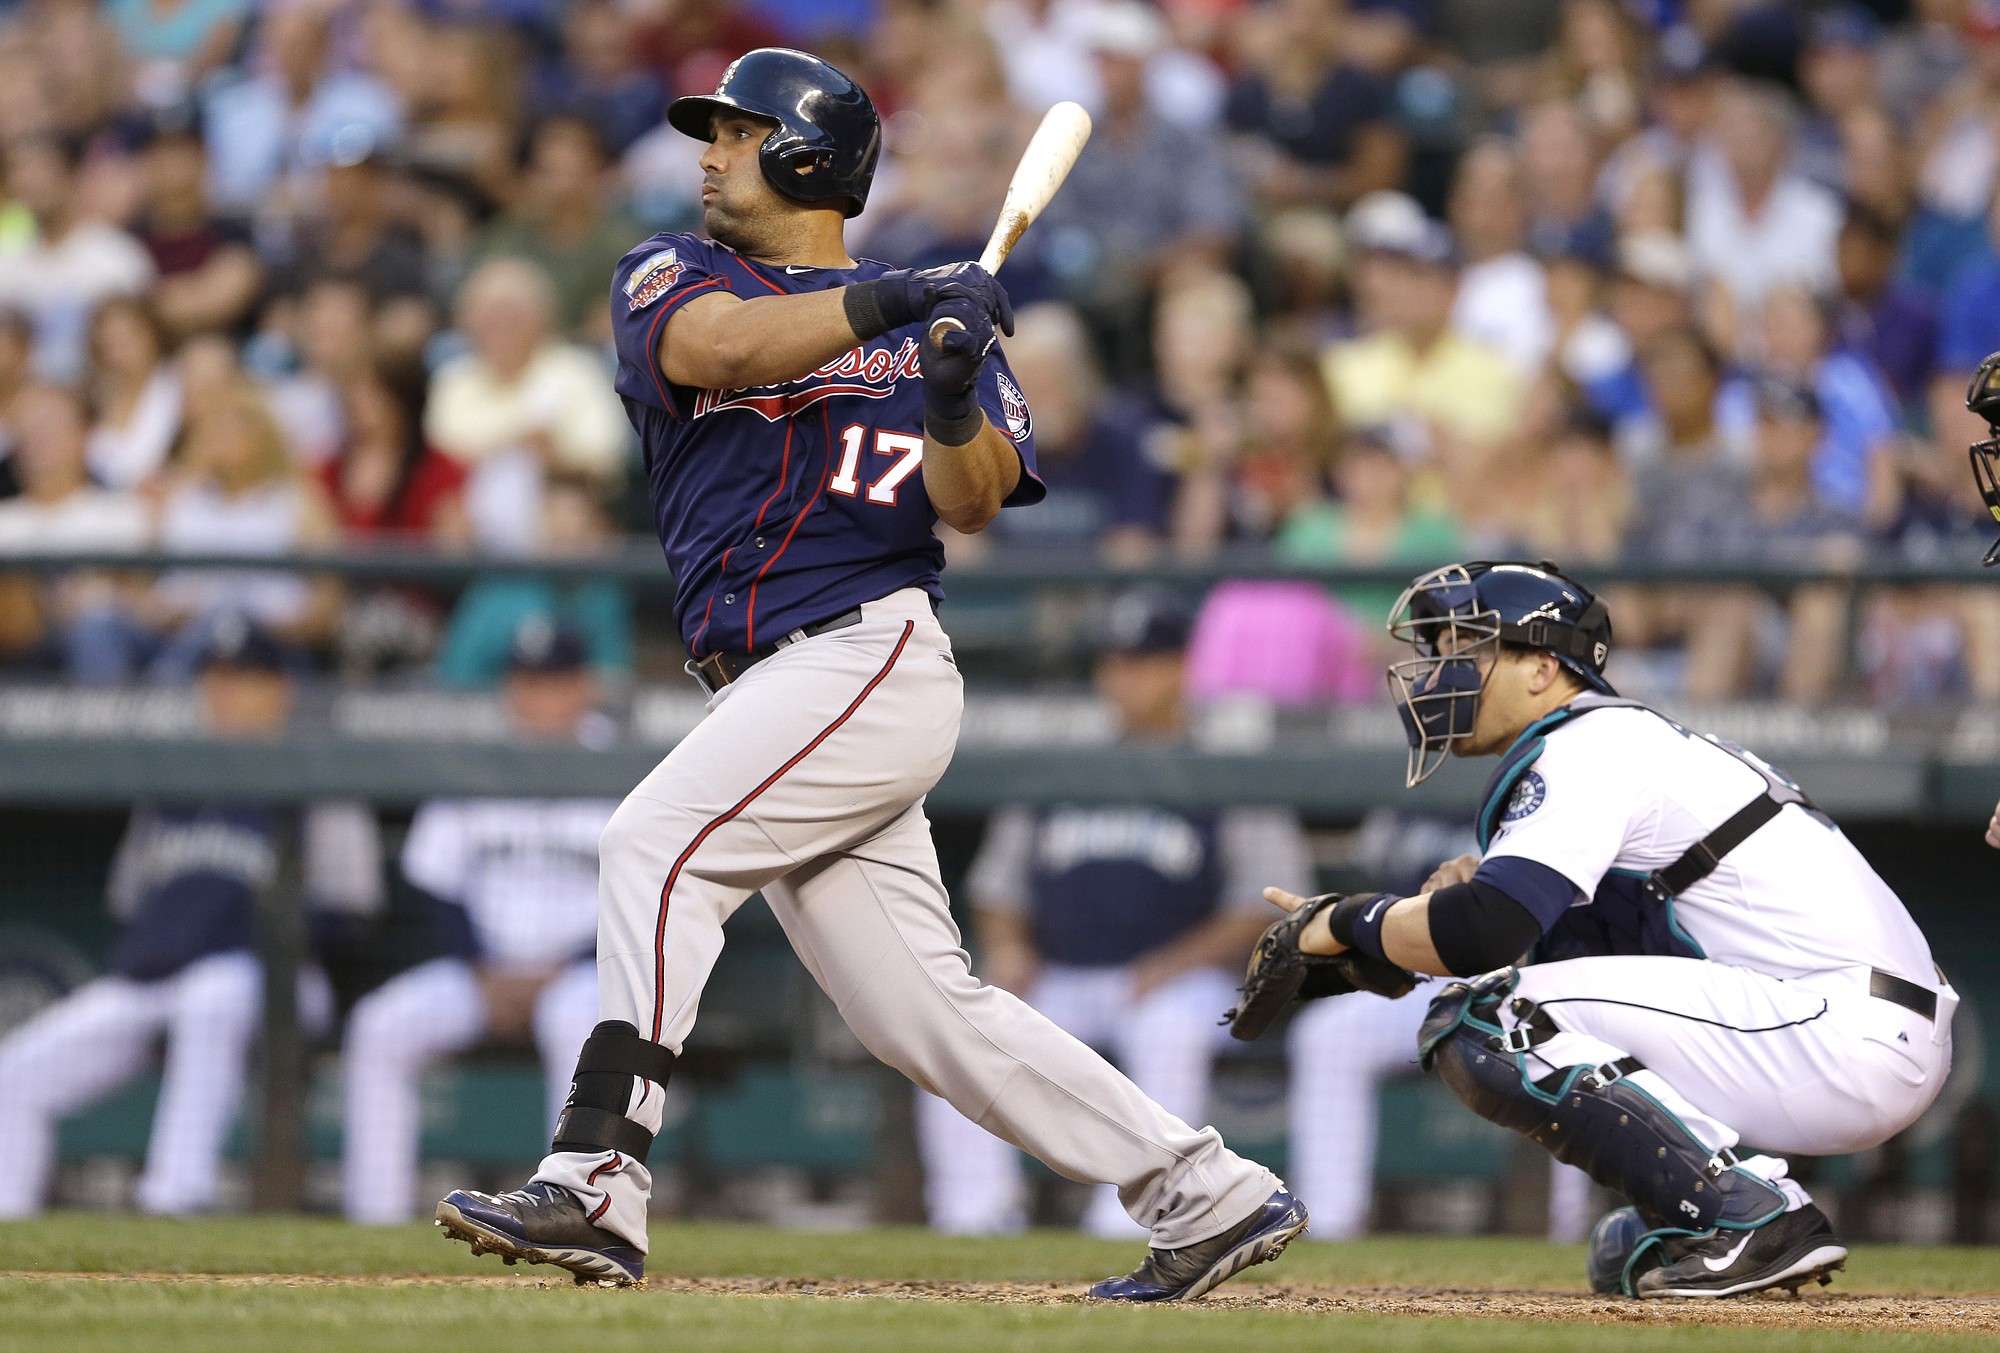 Minnesota Twins designated hitter Kendrys Morales (17) hits a two-run double in the fifth inning of a baseball game against the Seattle Mariners, Thursday, July 10, 2014, in Seattle. (AP Photo/Ted S.